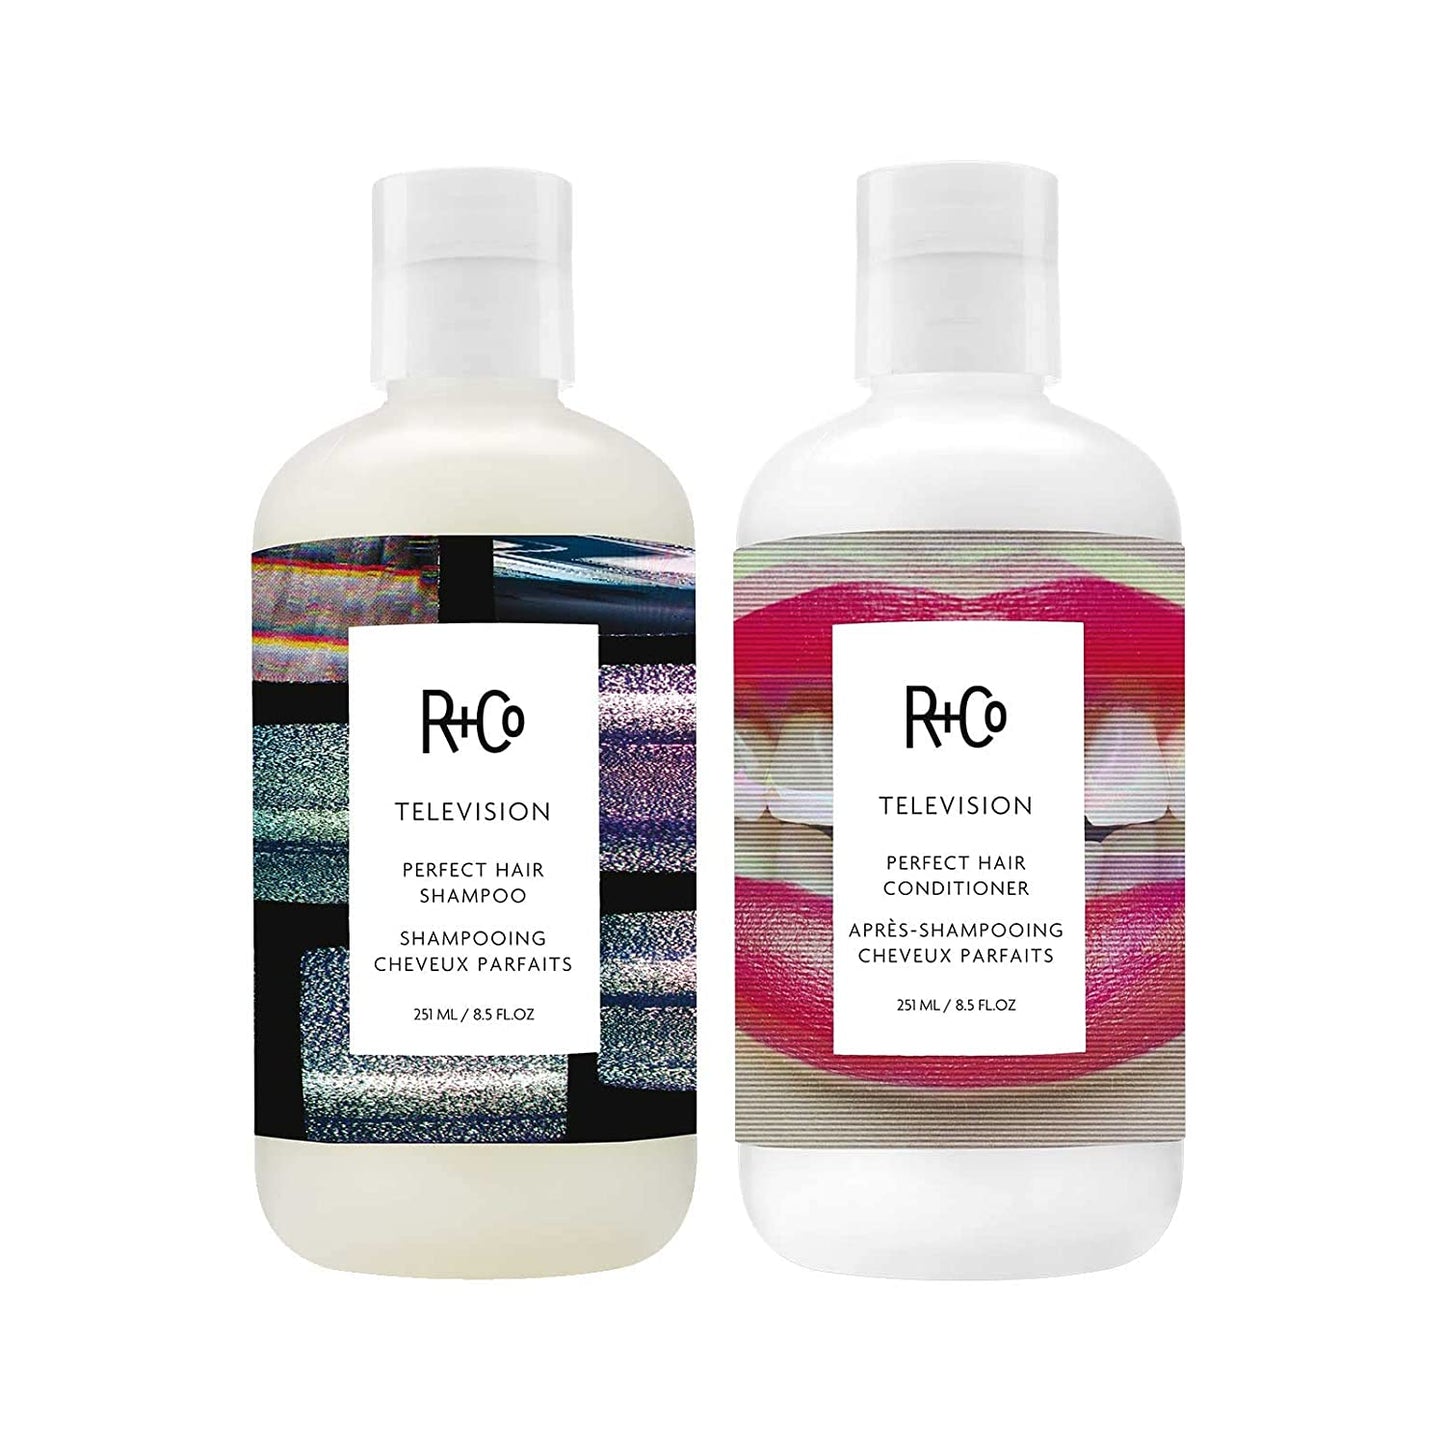 R+Co Television Perfect Hair Shampoo and Conditioner DUO